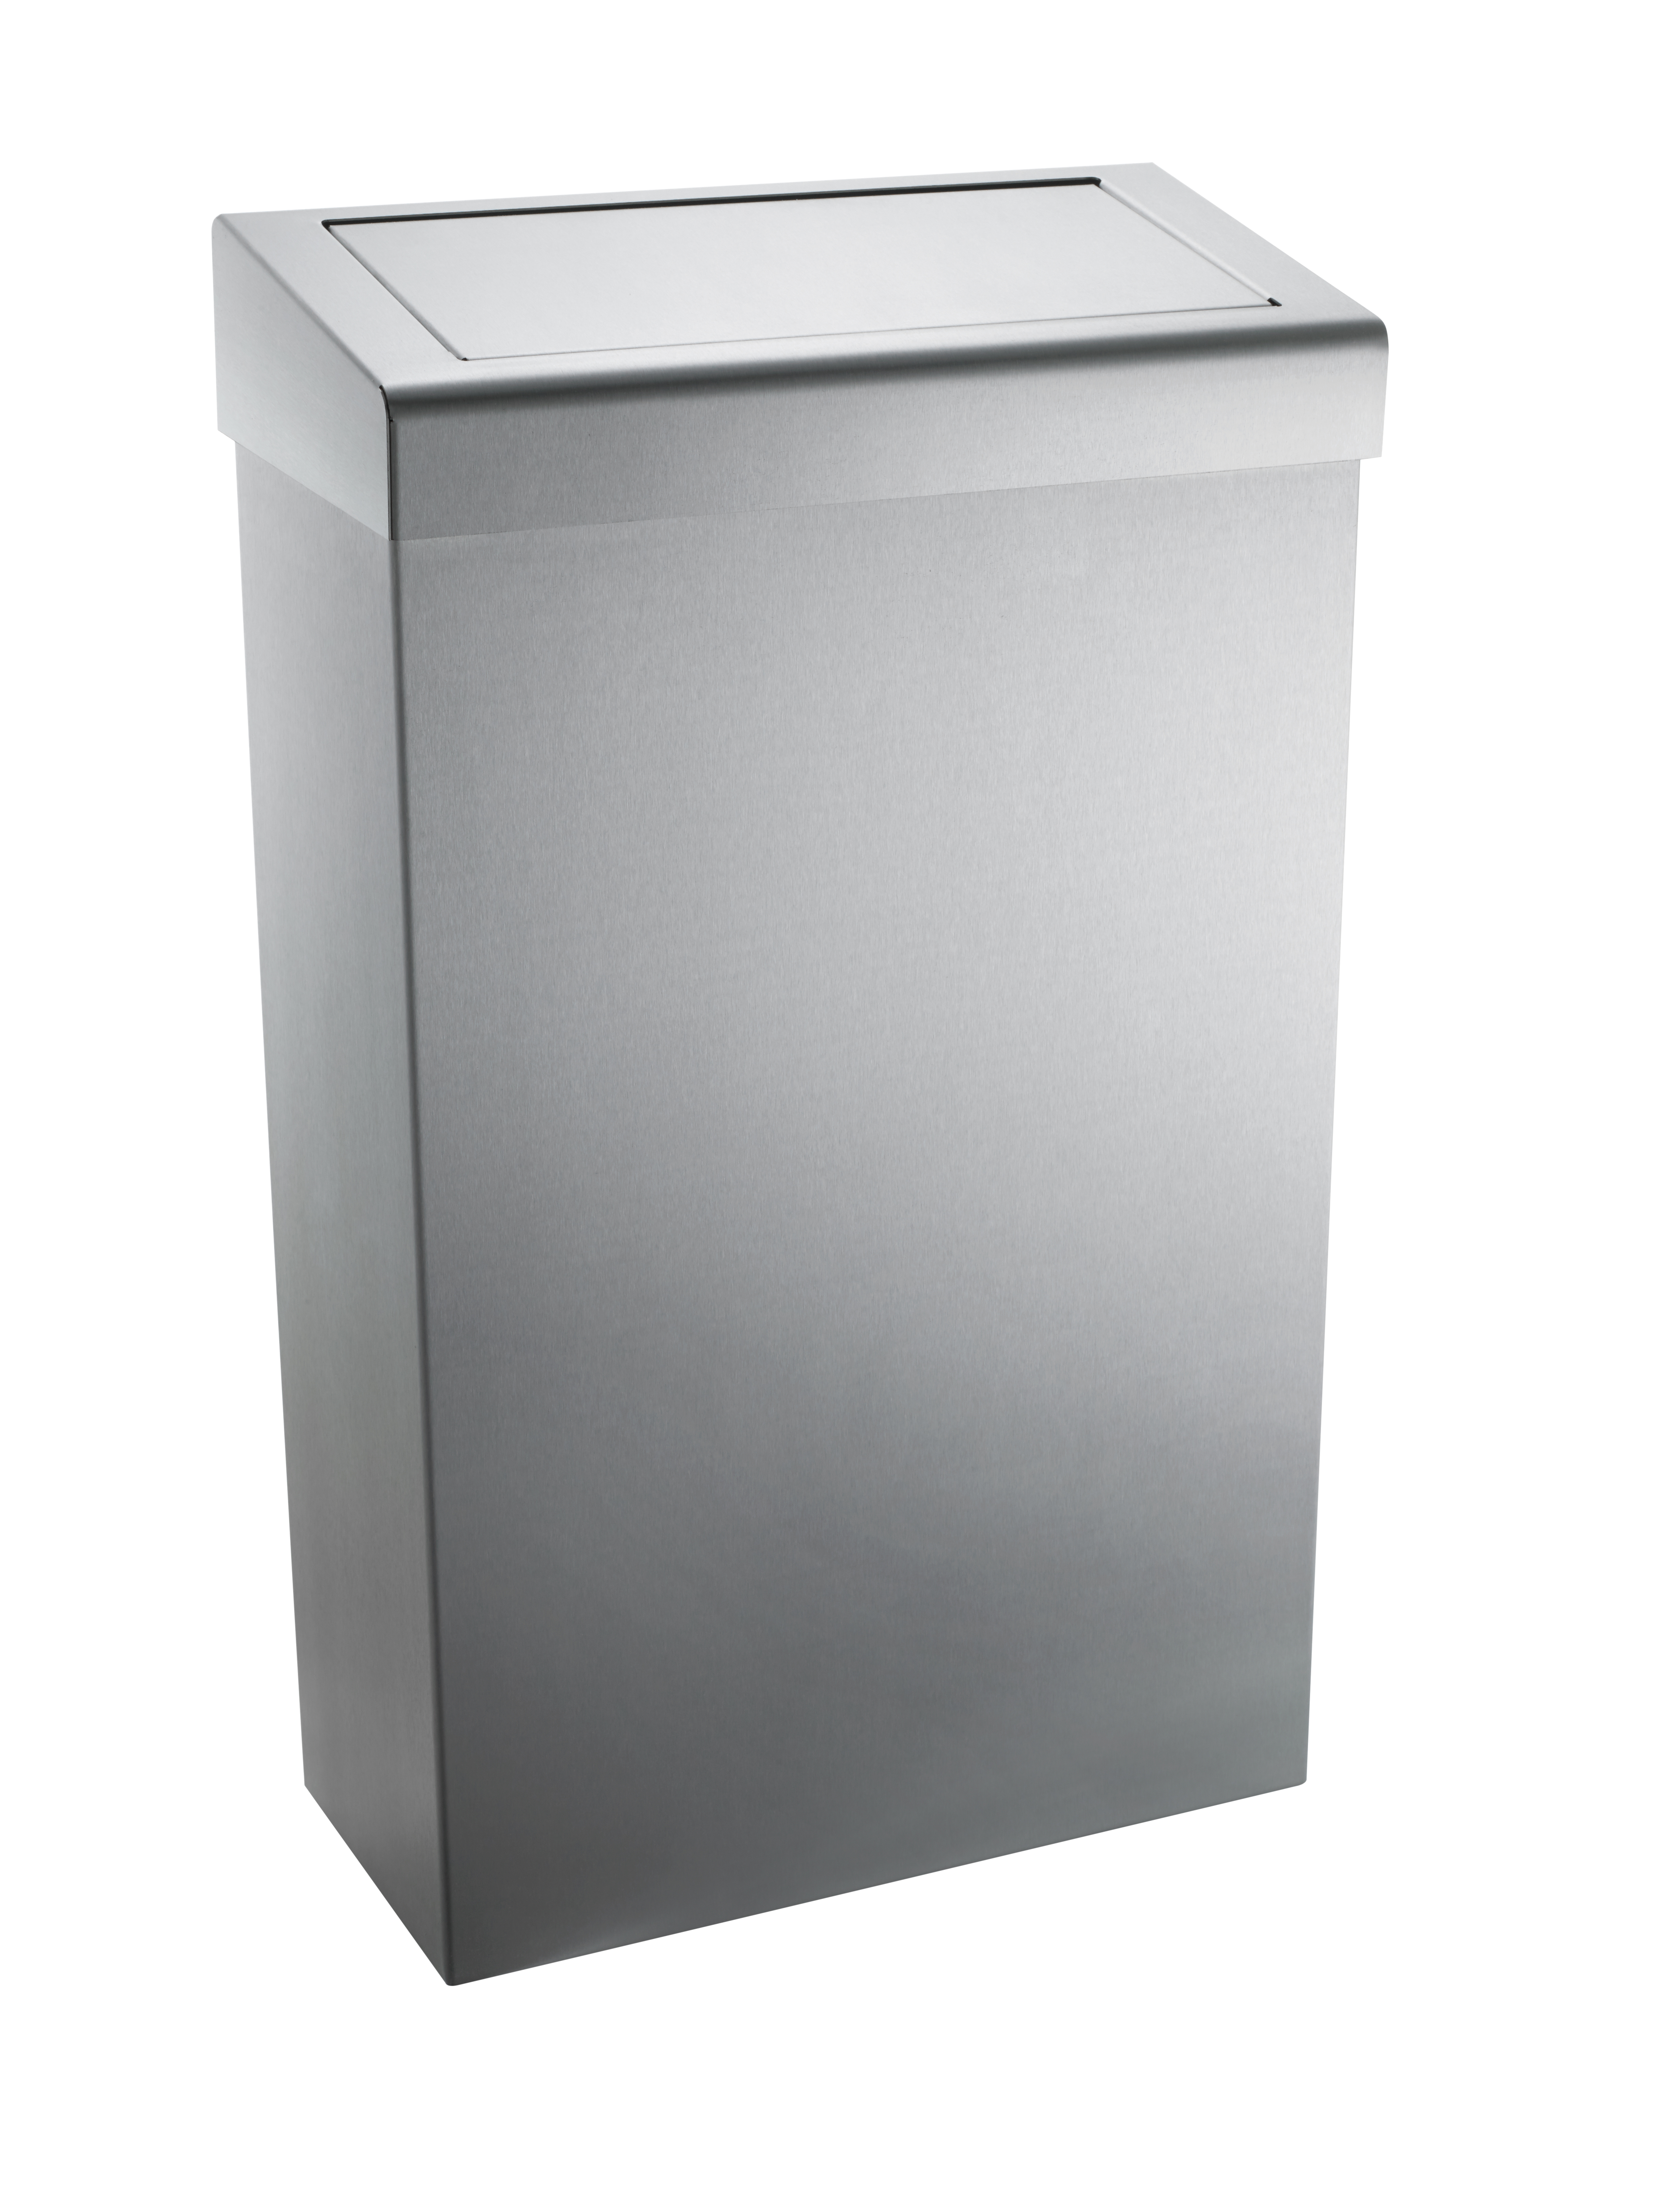 Waste Bin 30ltr With Flap Lid Stainless Steel